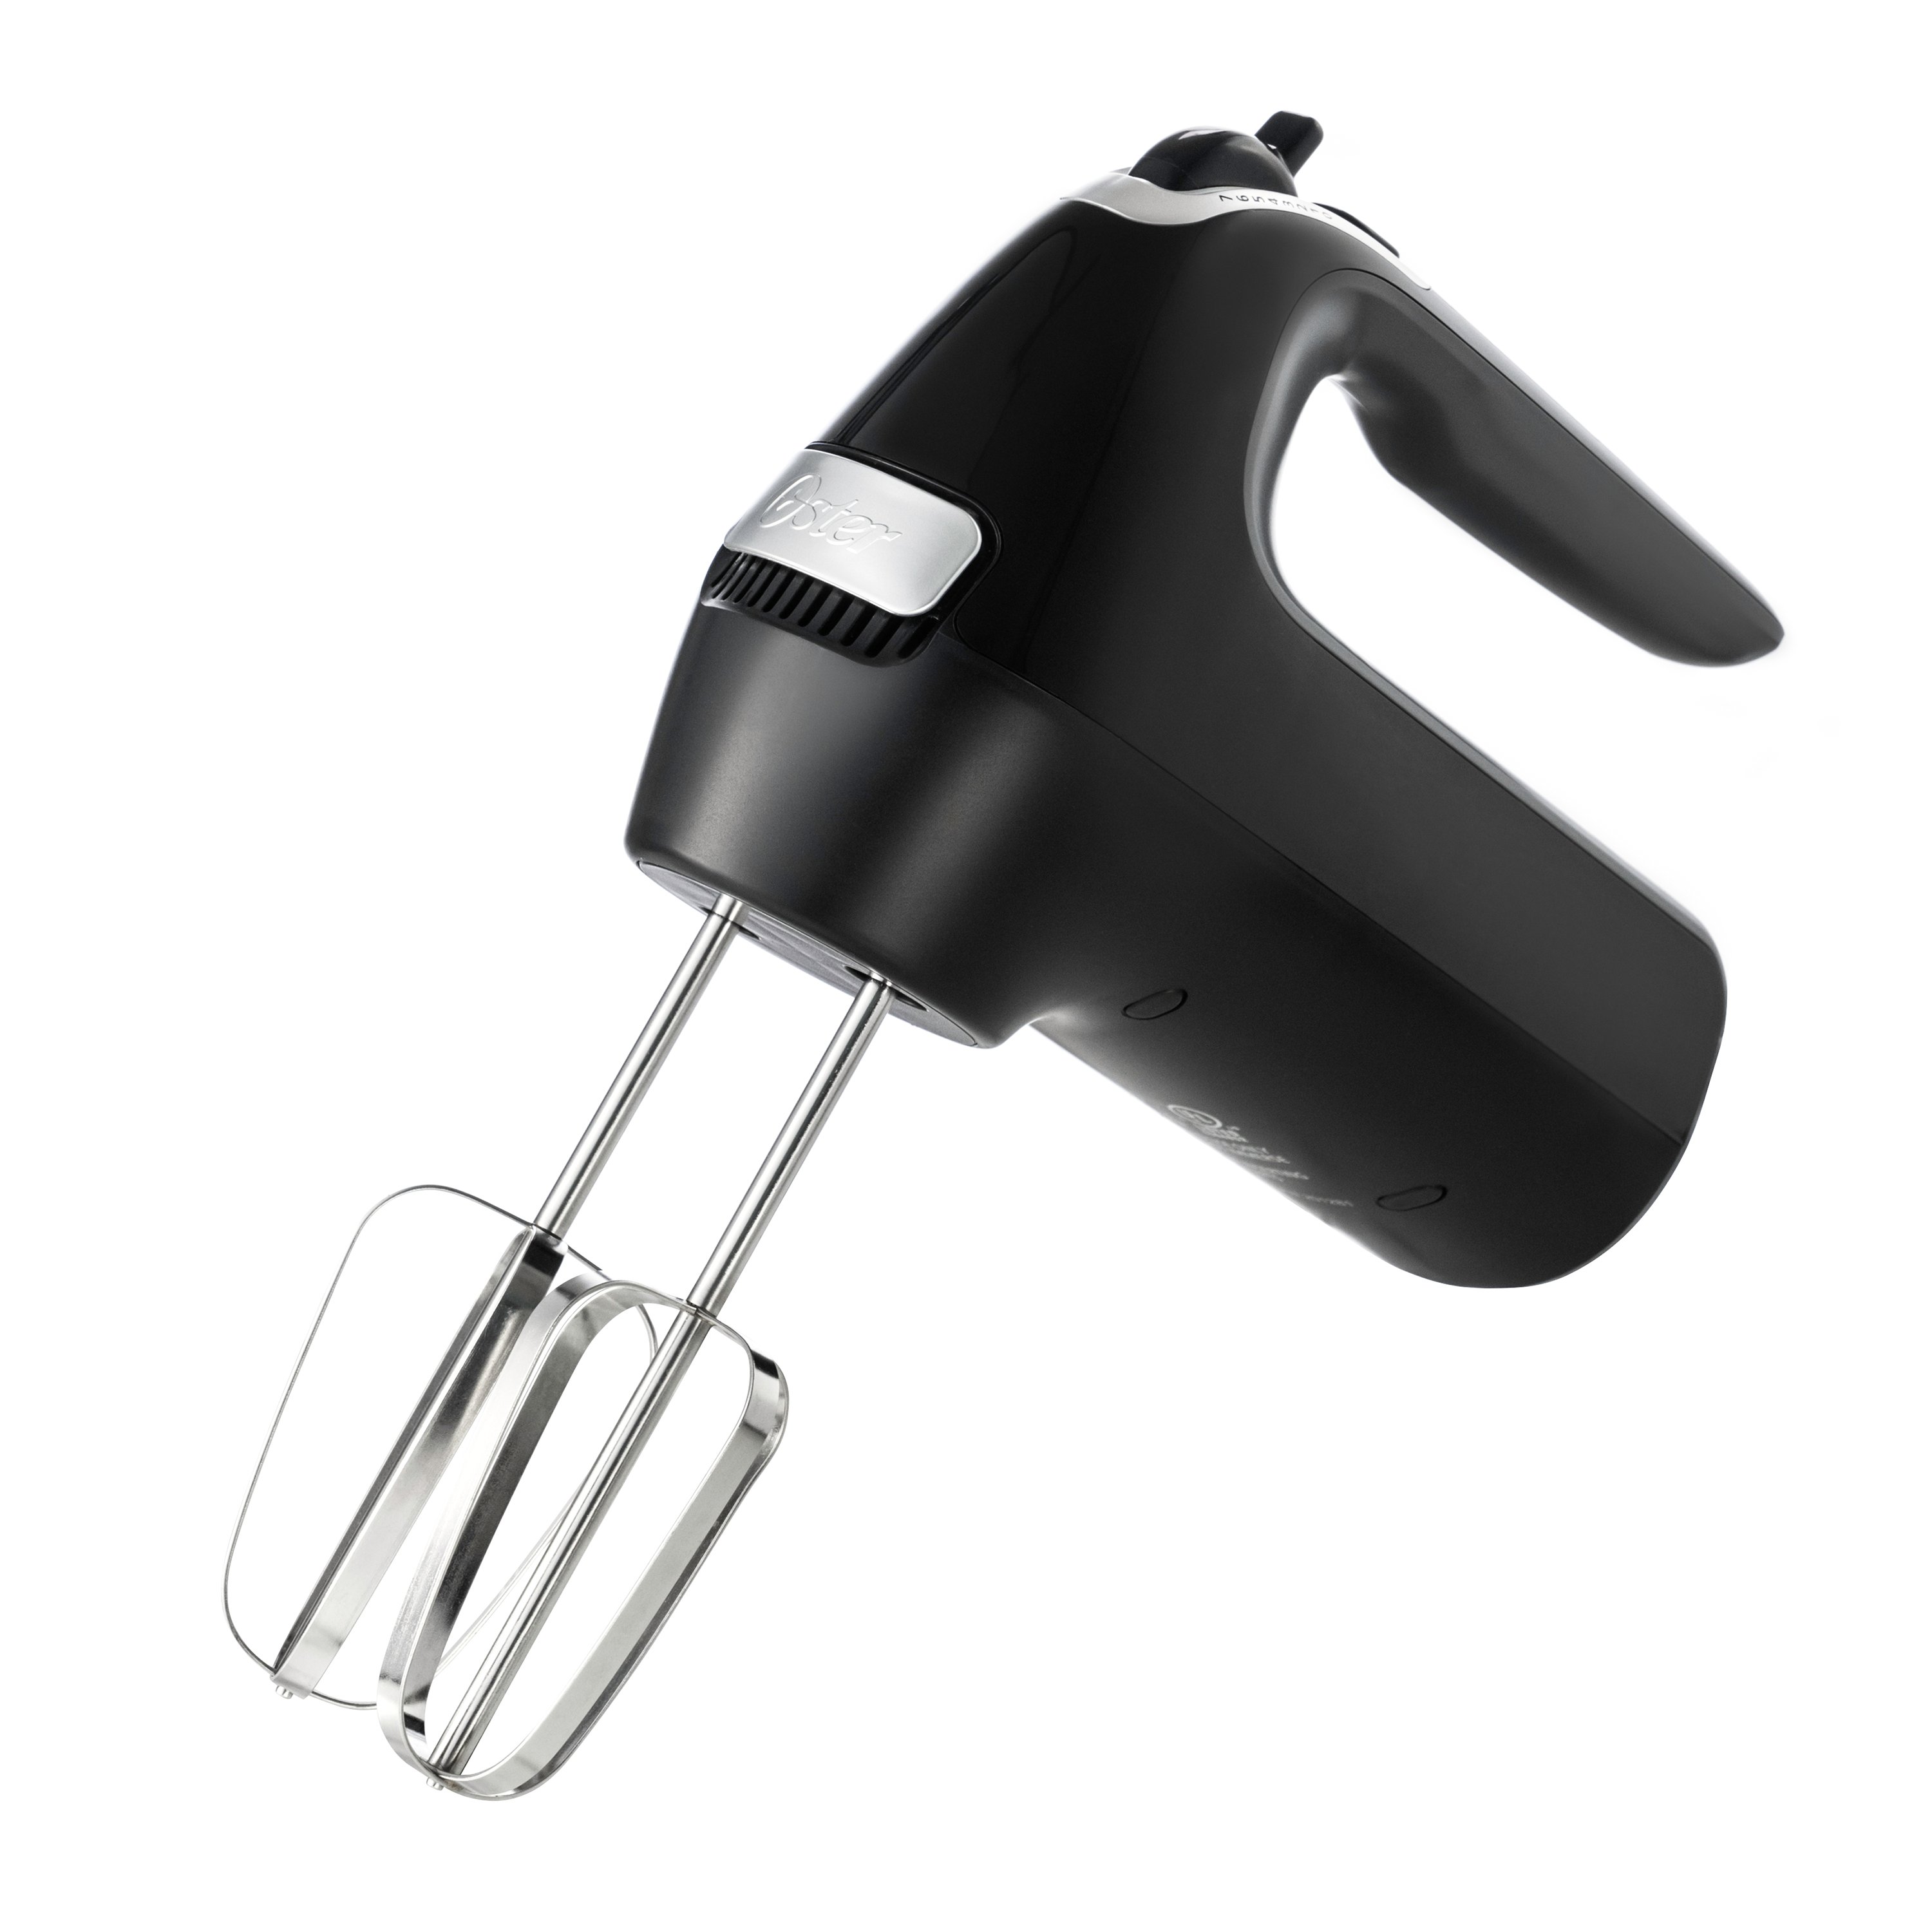 https://s7d9.scene7.com/is/image/NewellRubbermaid/DC-31700-2021_Innovation_Jetsons_Classic_Hand_Mixer-ATF-01